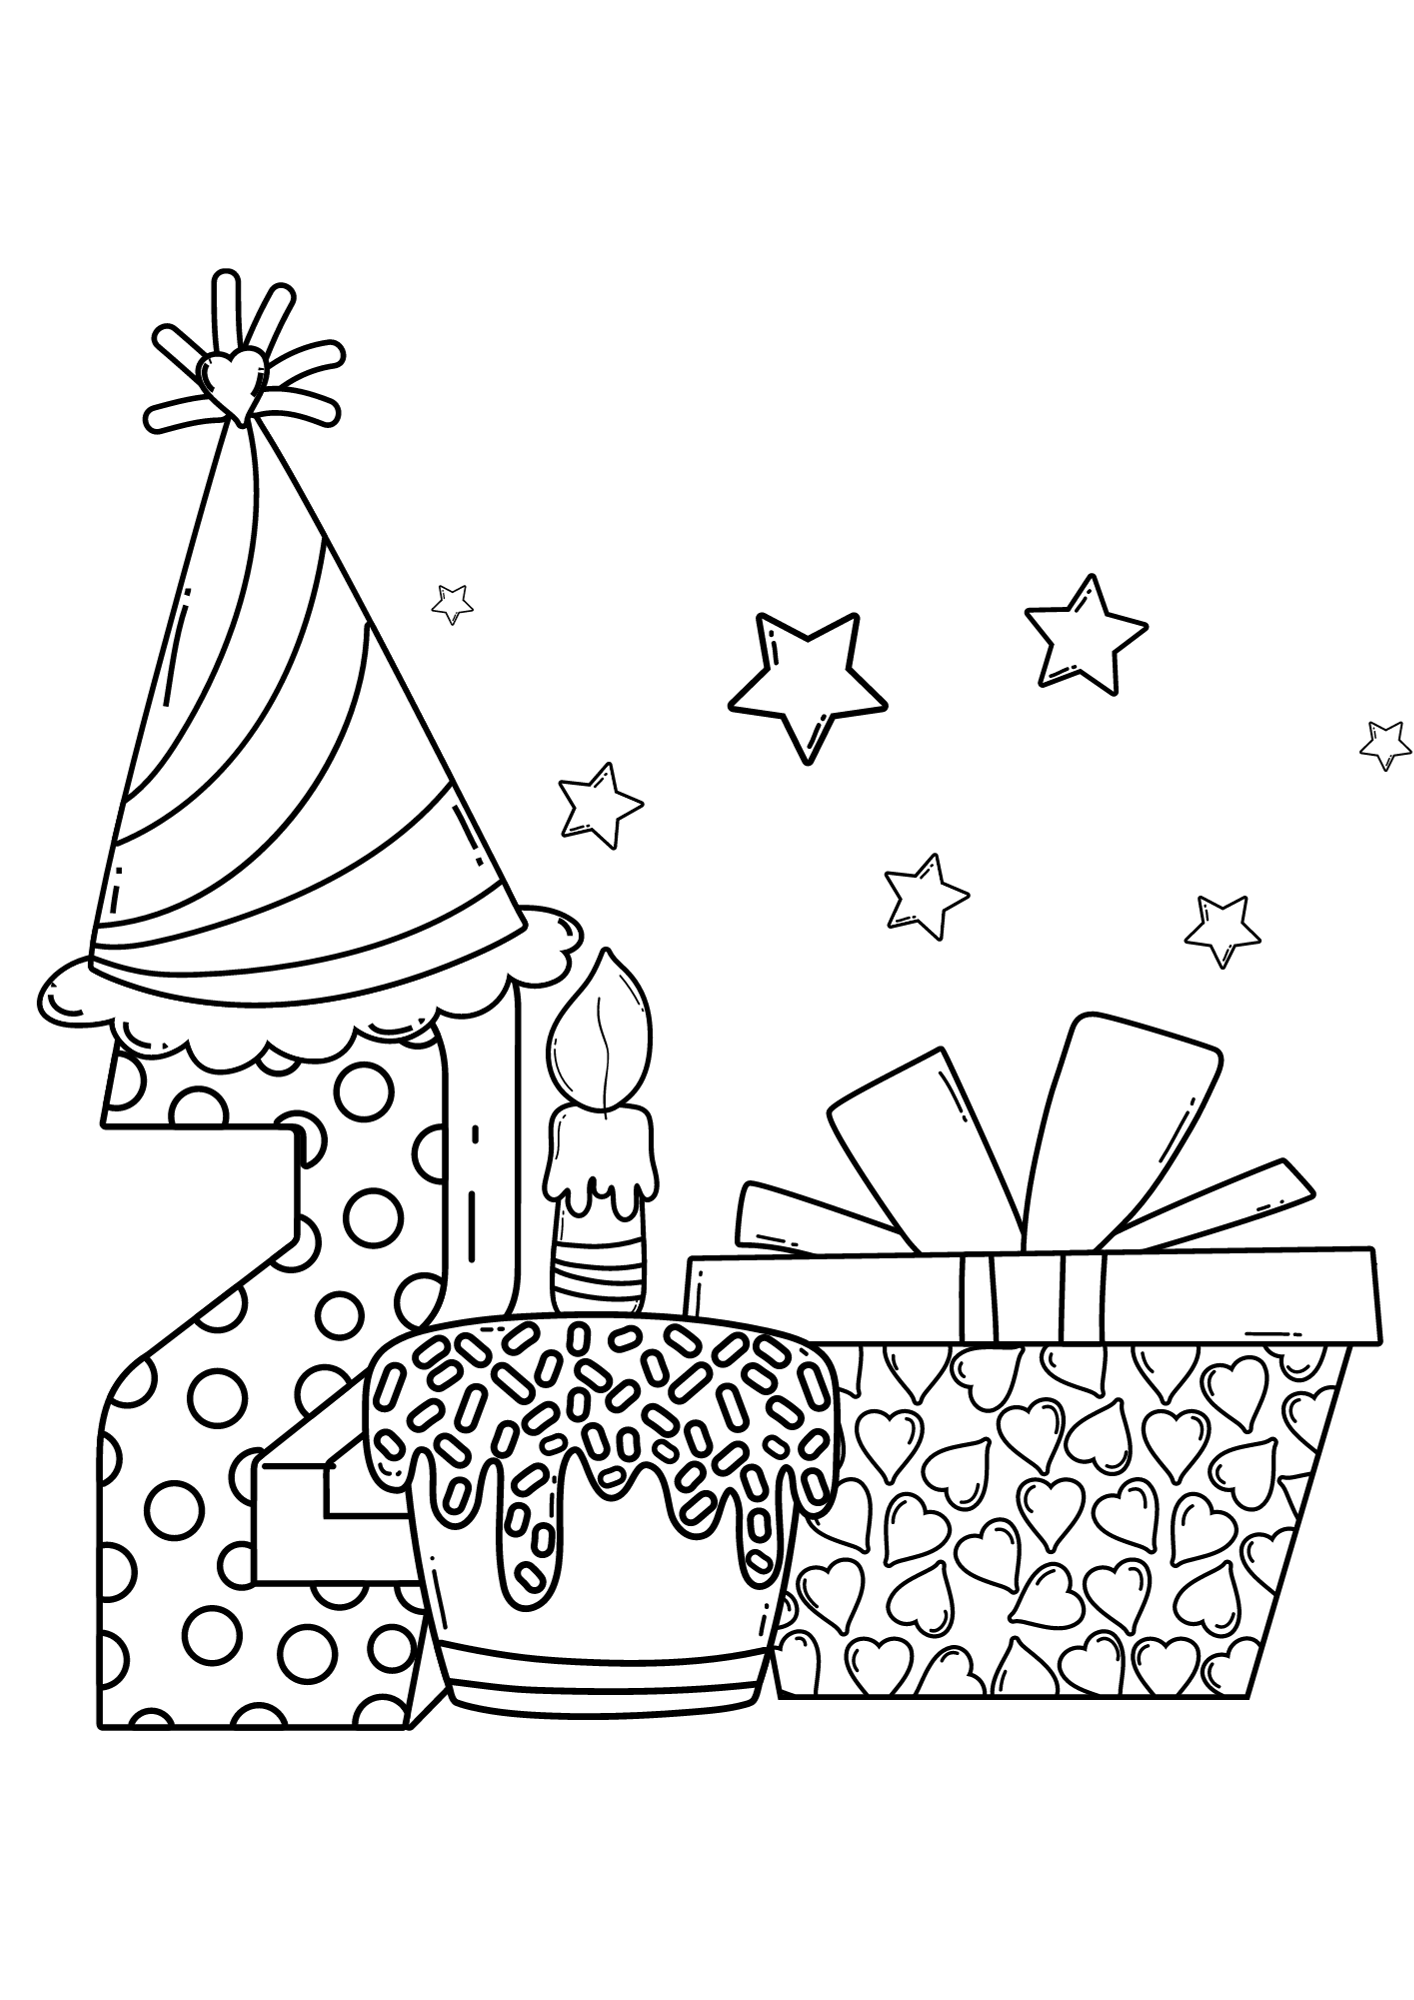 Kids Birthday Cartoons Black And White Coloring Page